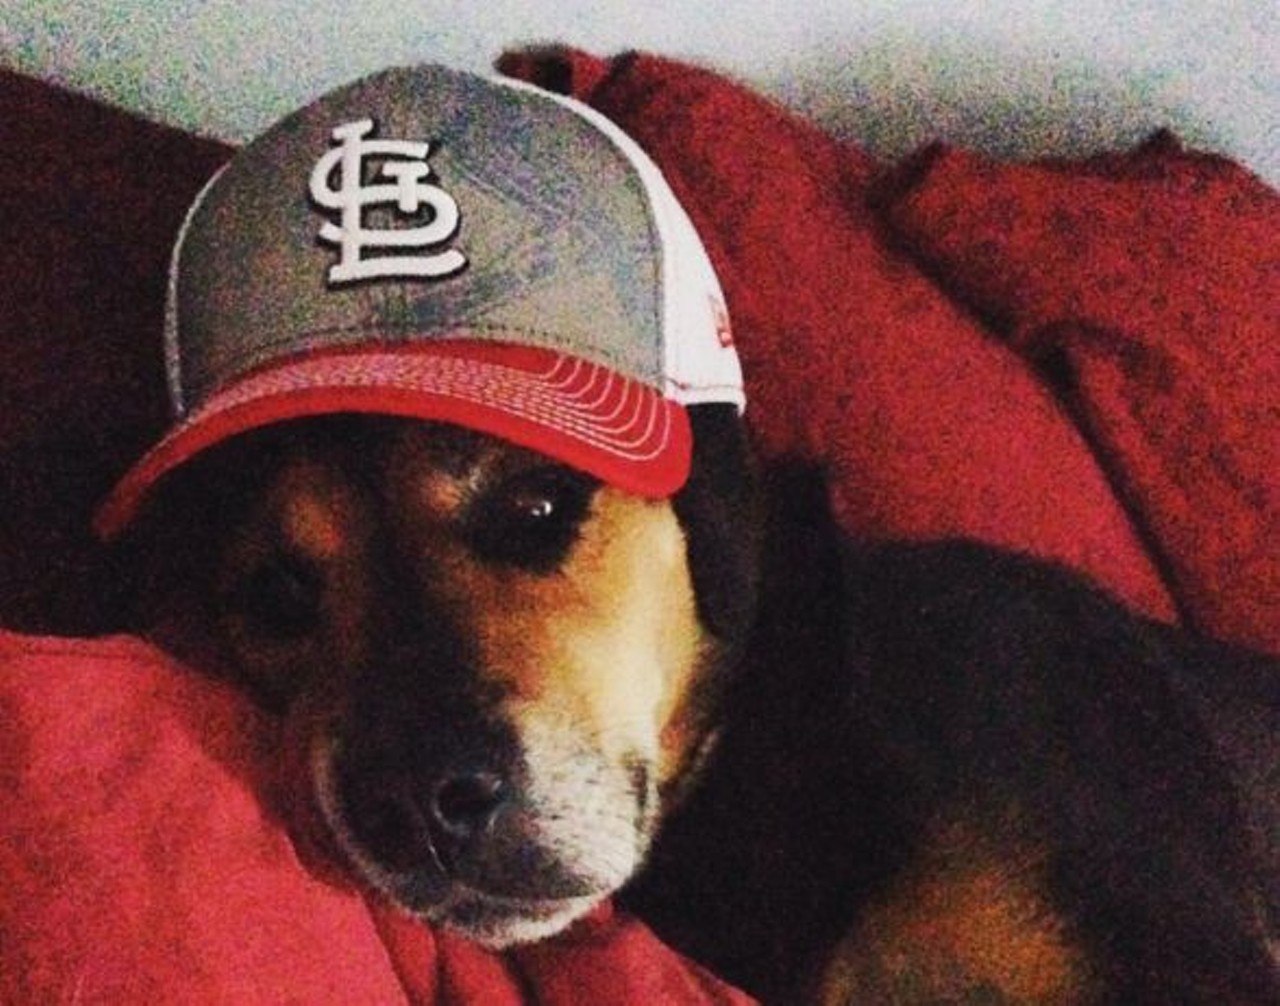 You know you're a true Cardinals fan when you go to bed with your ball cap on. Photo courtesy of Instagram / iberg34.